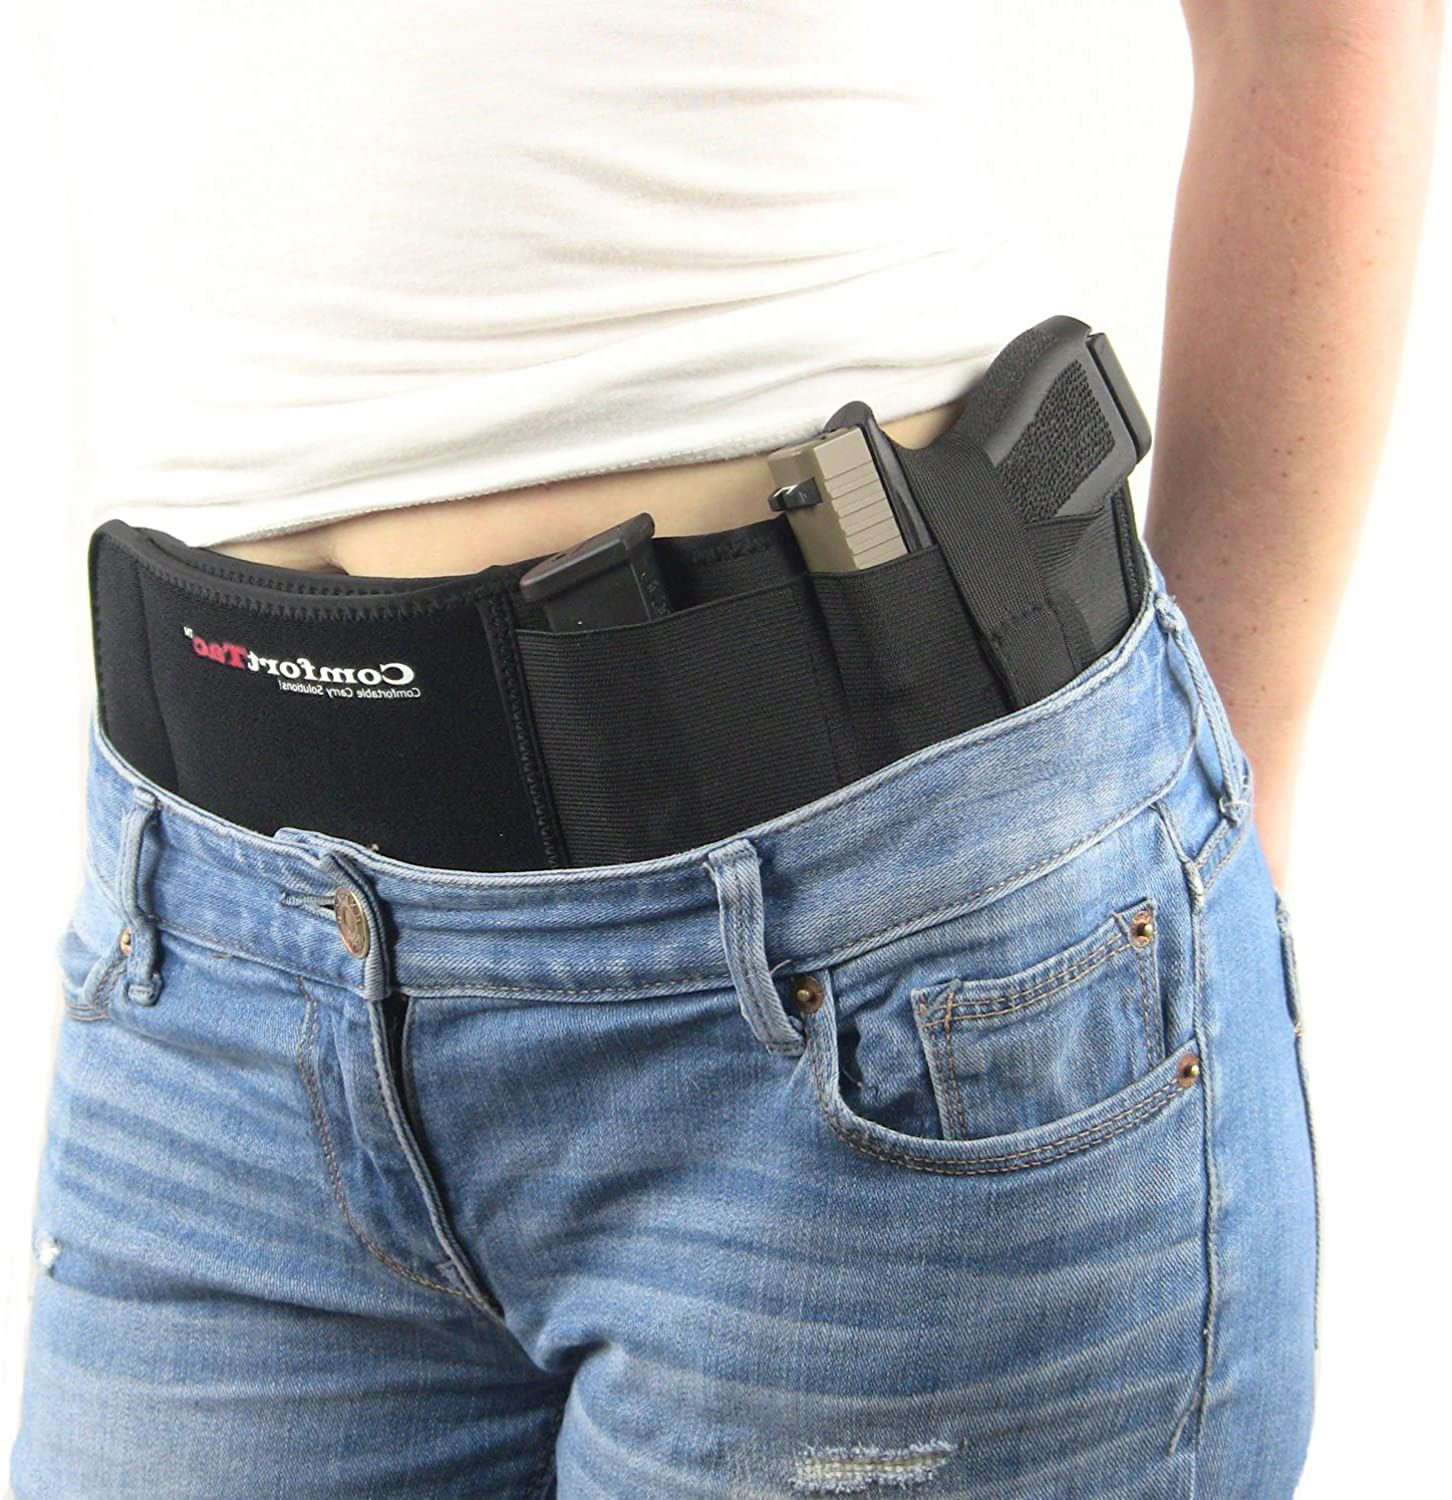 10 Best Concealed Carry Holsters Of 2020 ReviewThis